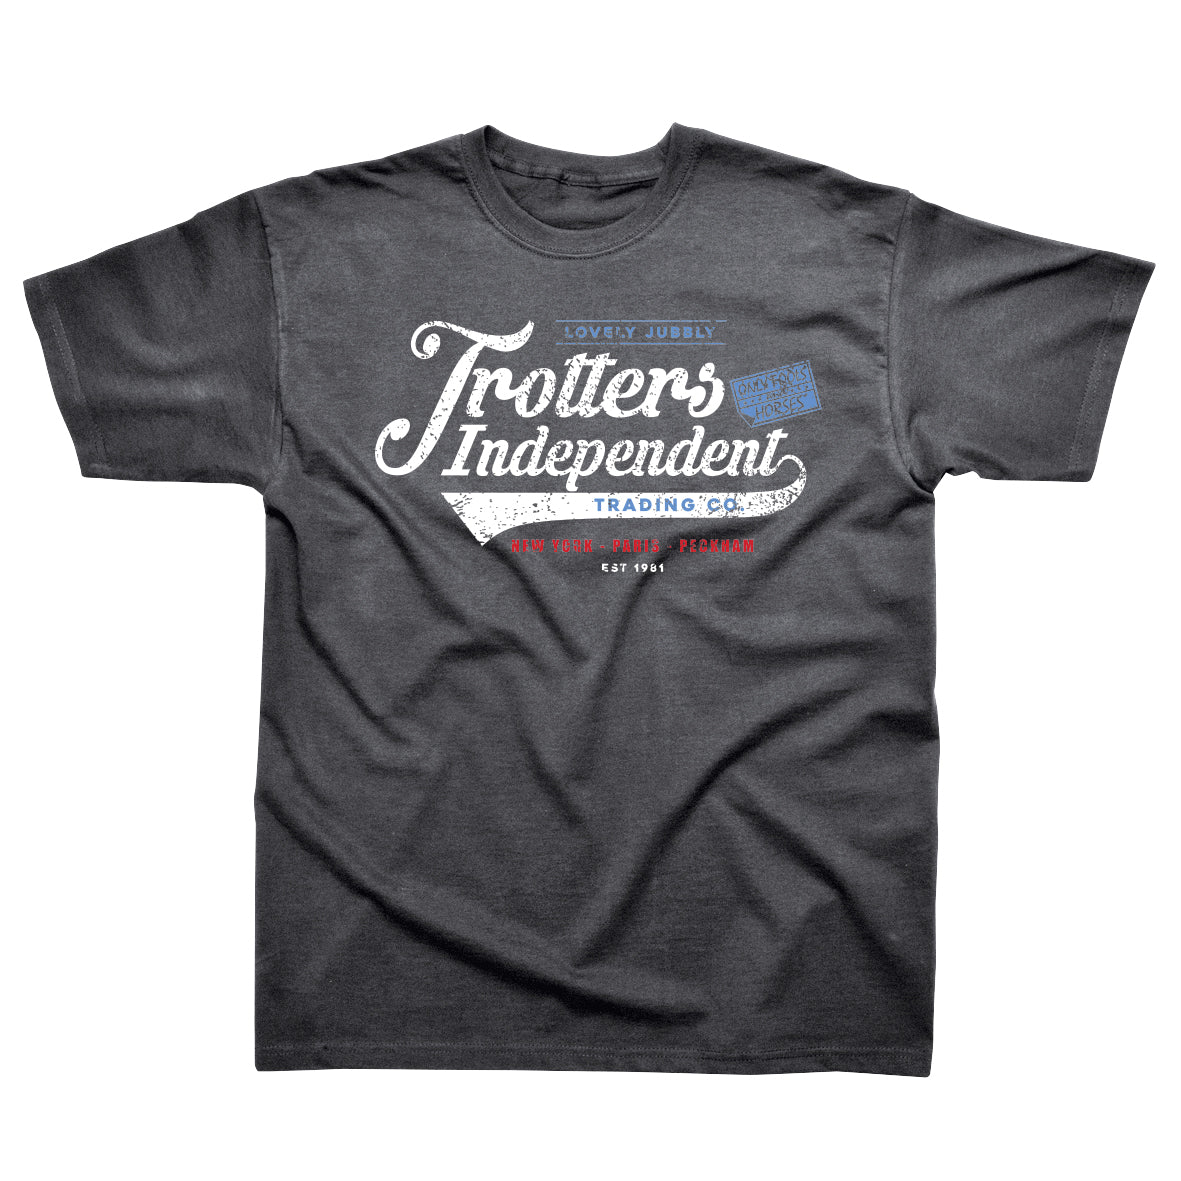 Only Fools and Horses Trotters Trading Shirt - Ireland Vinyl